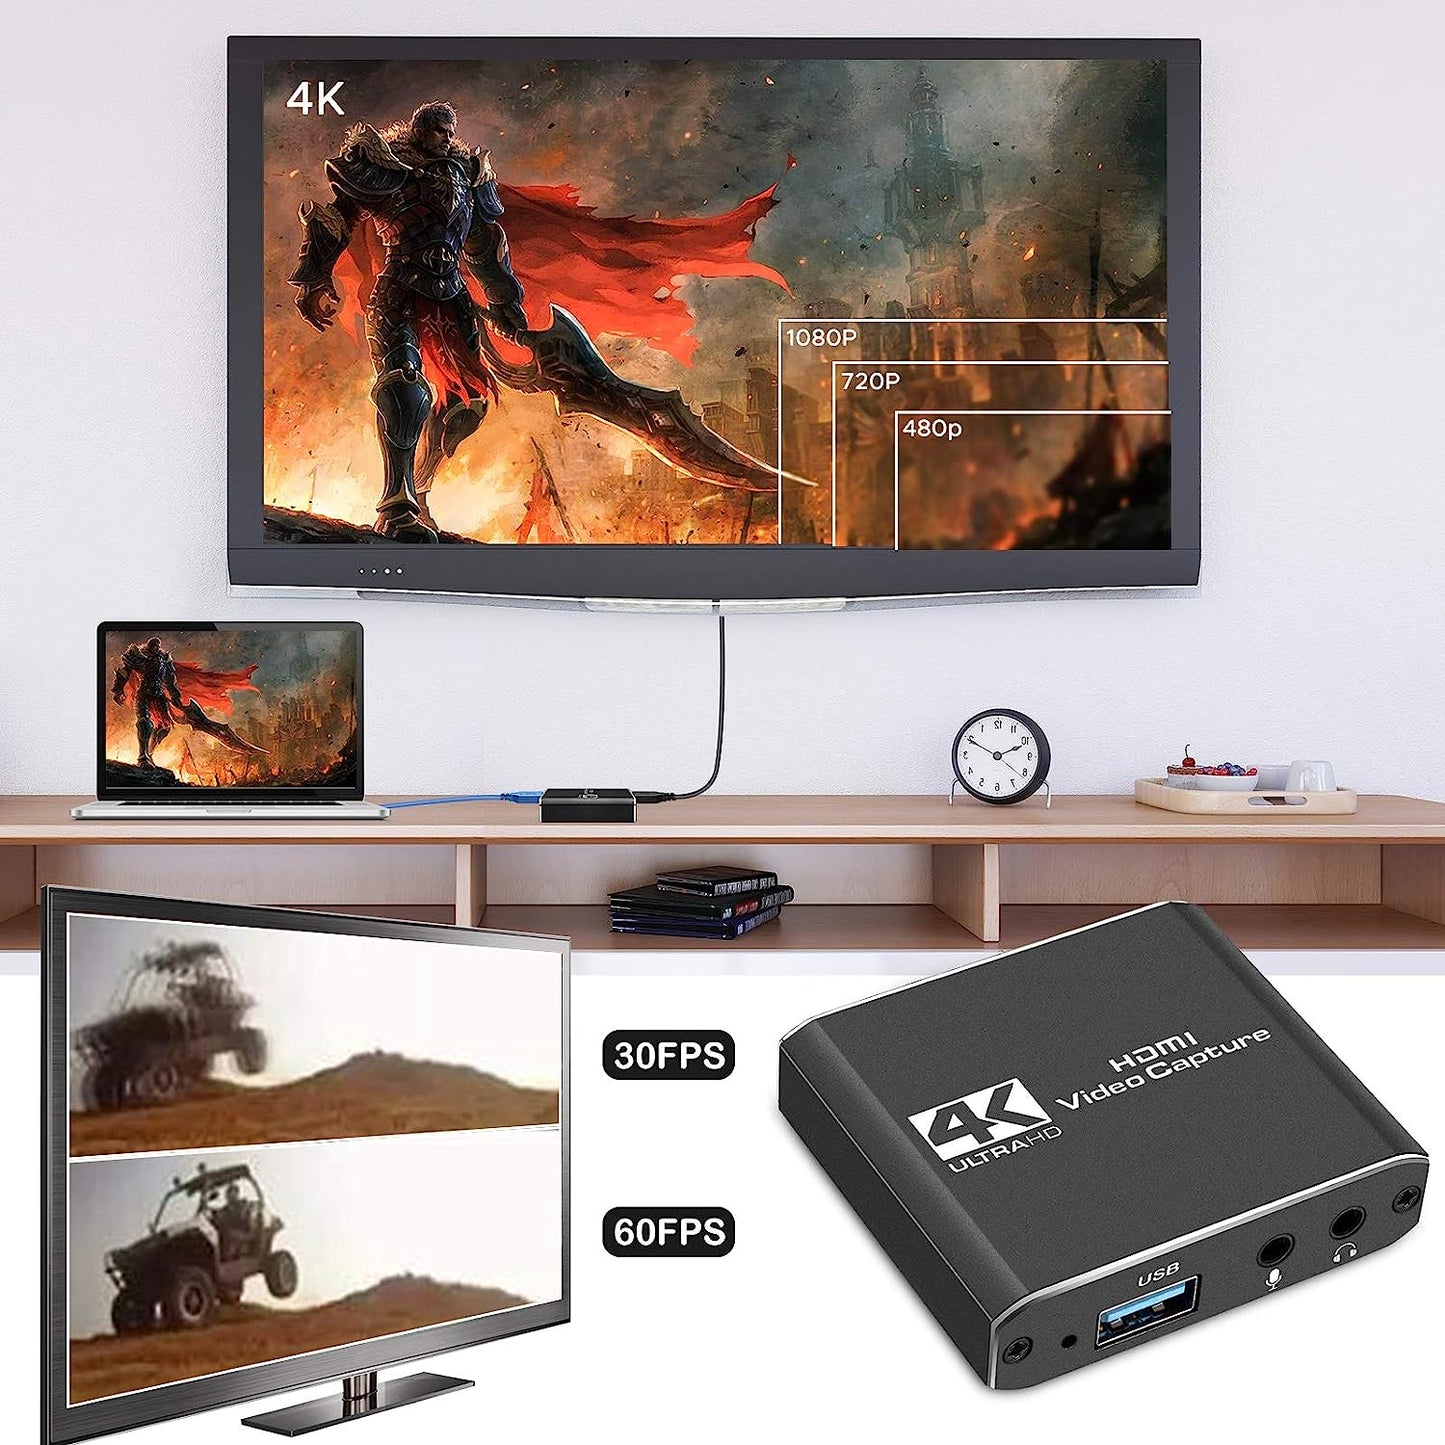 Audio Video Capture Card with Microphone, 4K HDMI Loop-Out and 1080P 60Fps Video Recorder for Gaming, Live Streaming and Video Conferencing, Compatible with Nintendo Switch, PS4, OBS, Cameras and PC